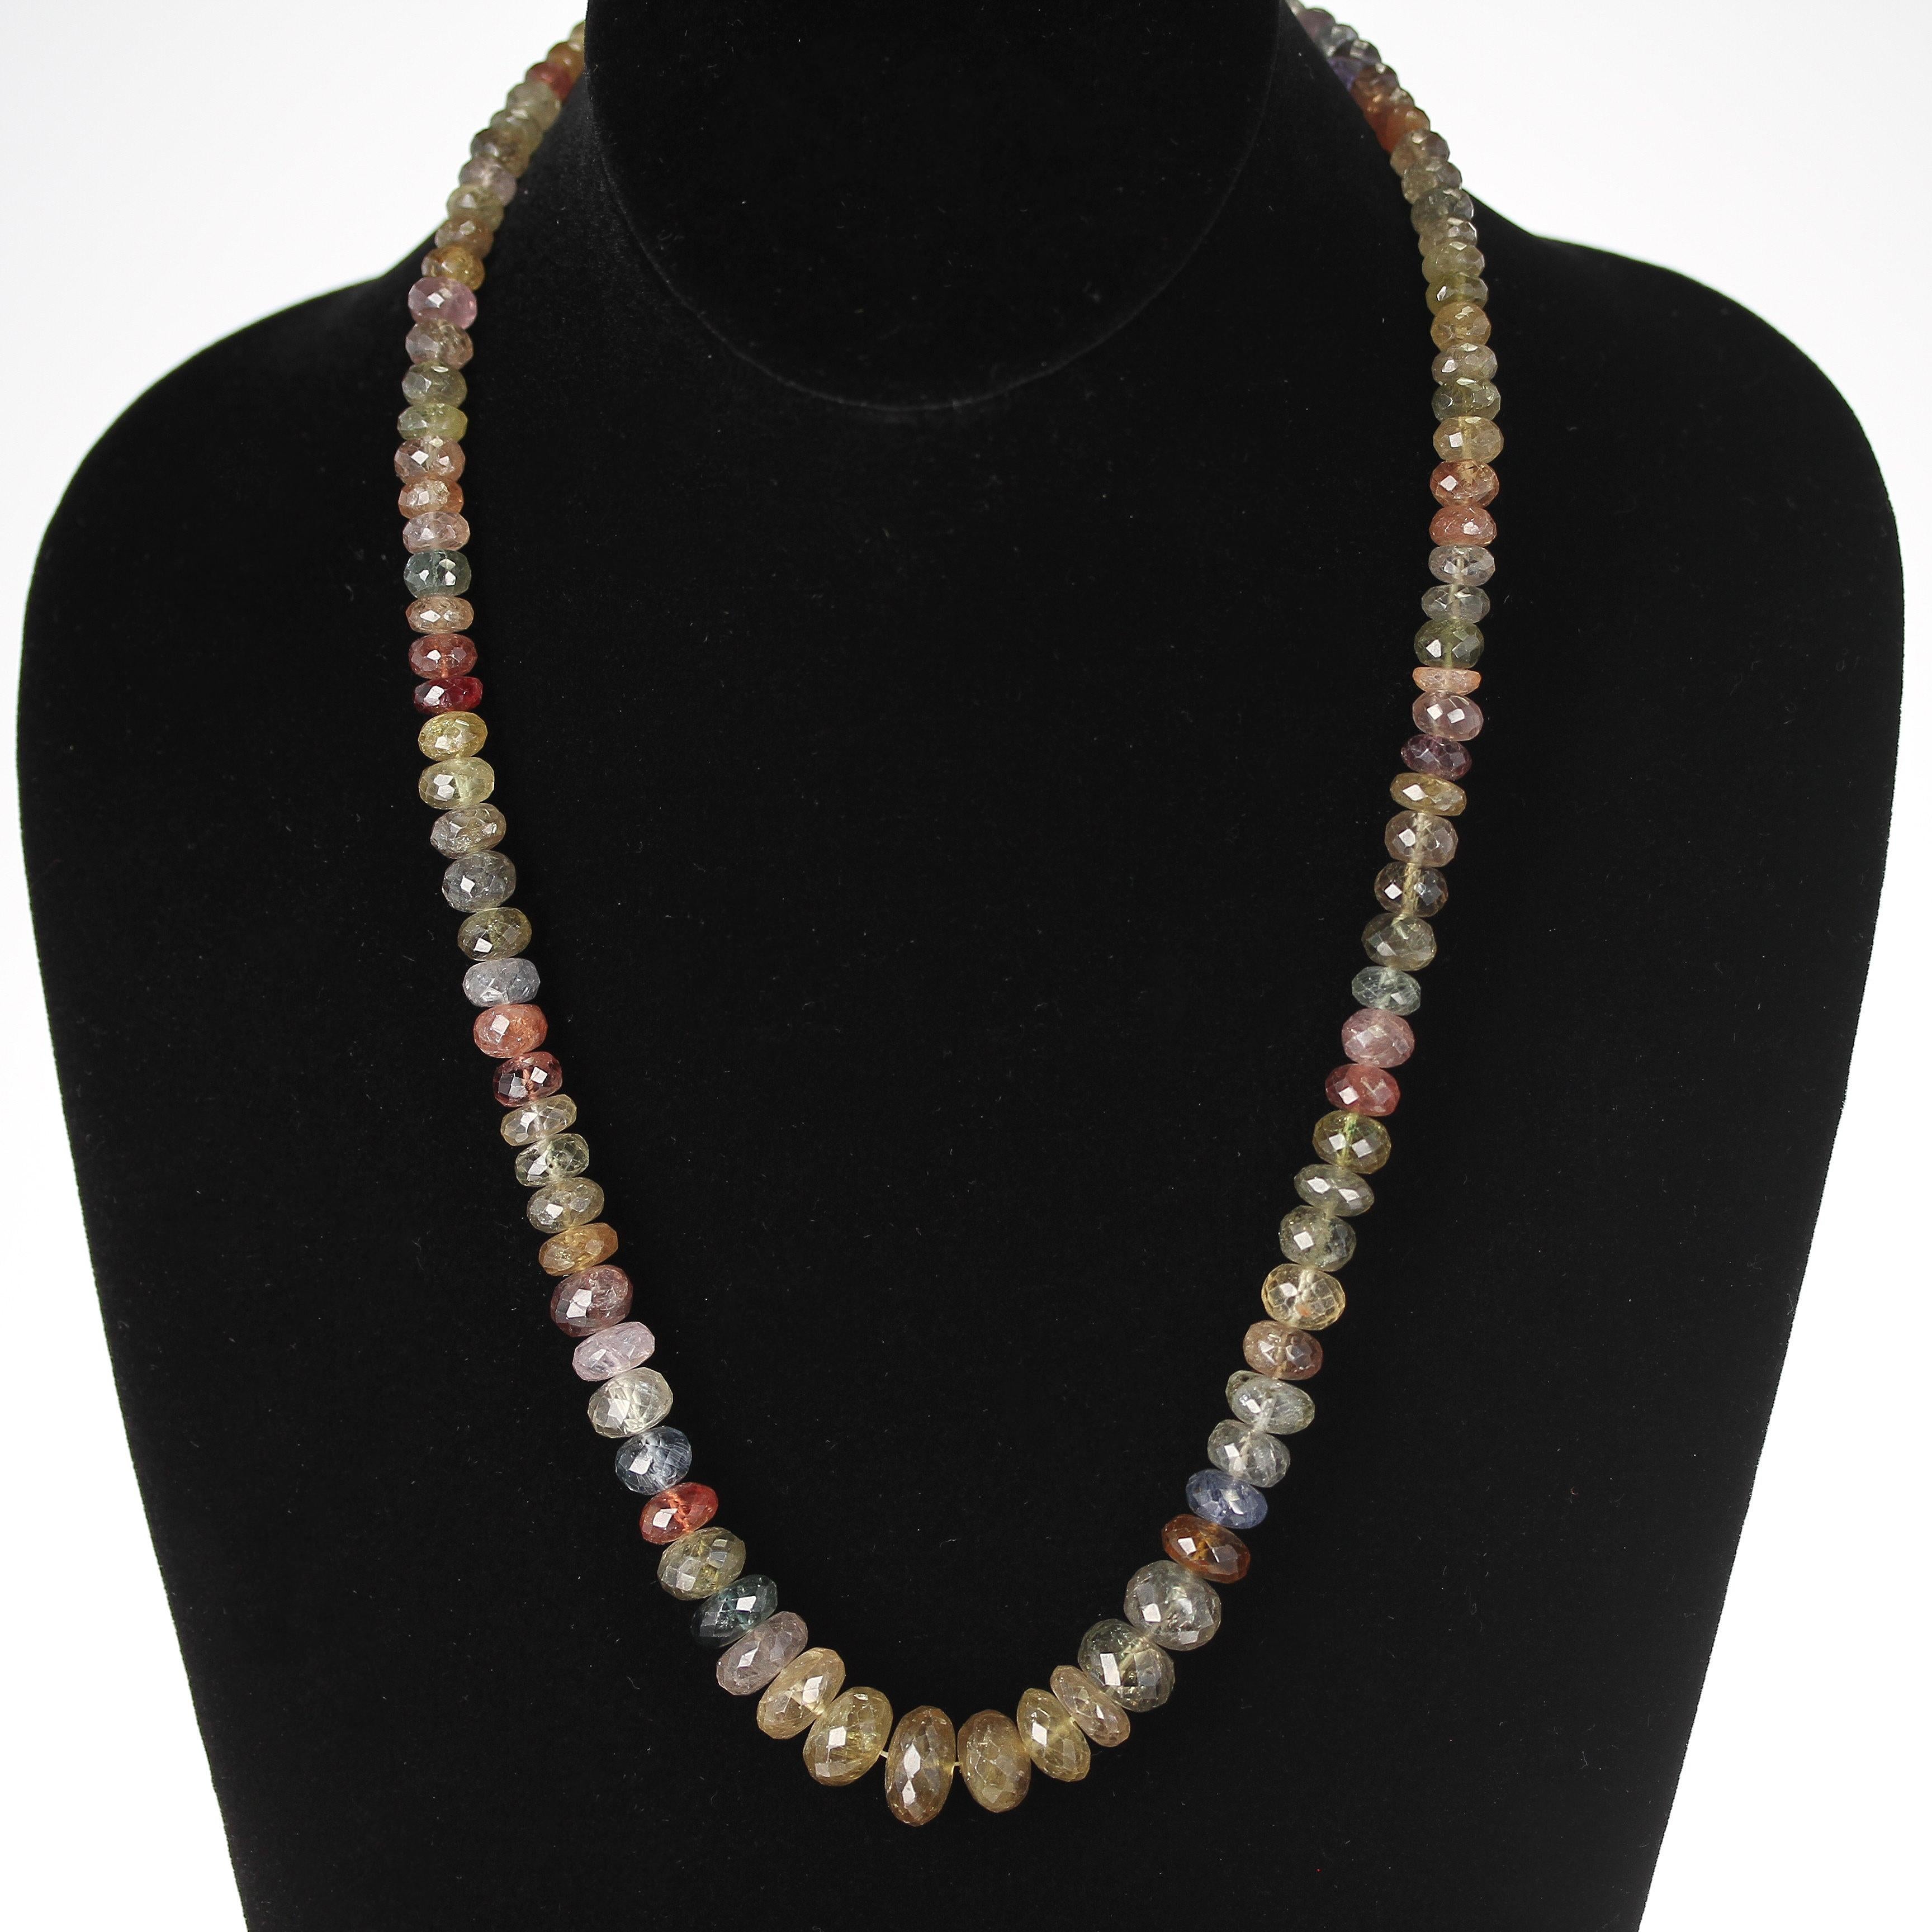 A Multi-Color Earthy Tone Fancy Sapphire Faceted Beads Necklace with a 14K Clasp, weighing 415 carats. The length is 21 Inches and the beads range from 7MM to 12MM. 

We can also customize the necklace according to your preferences, as per the